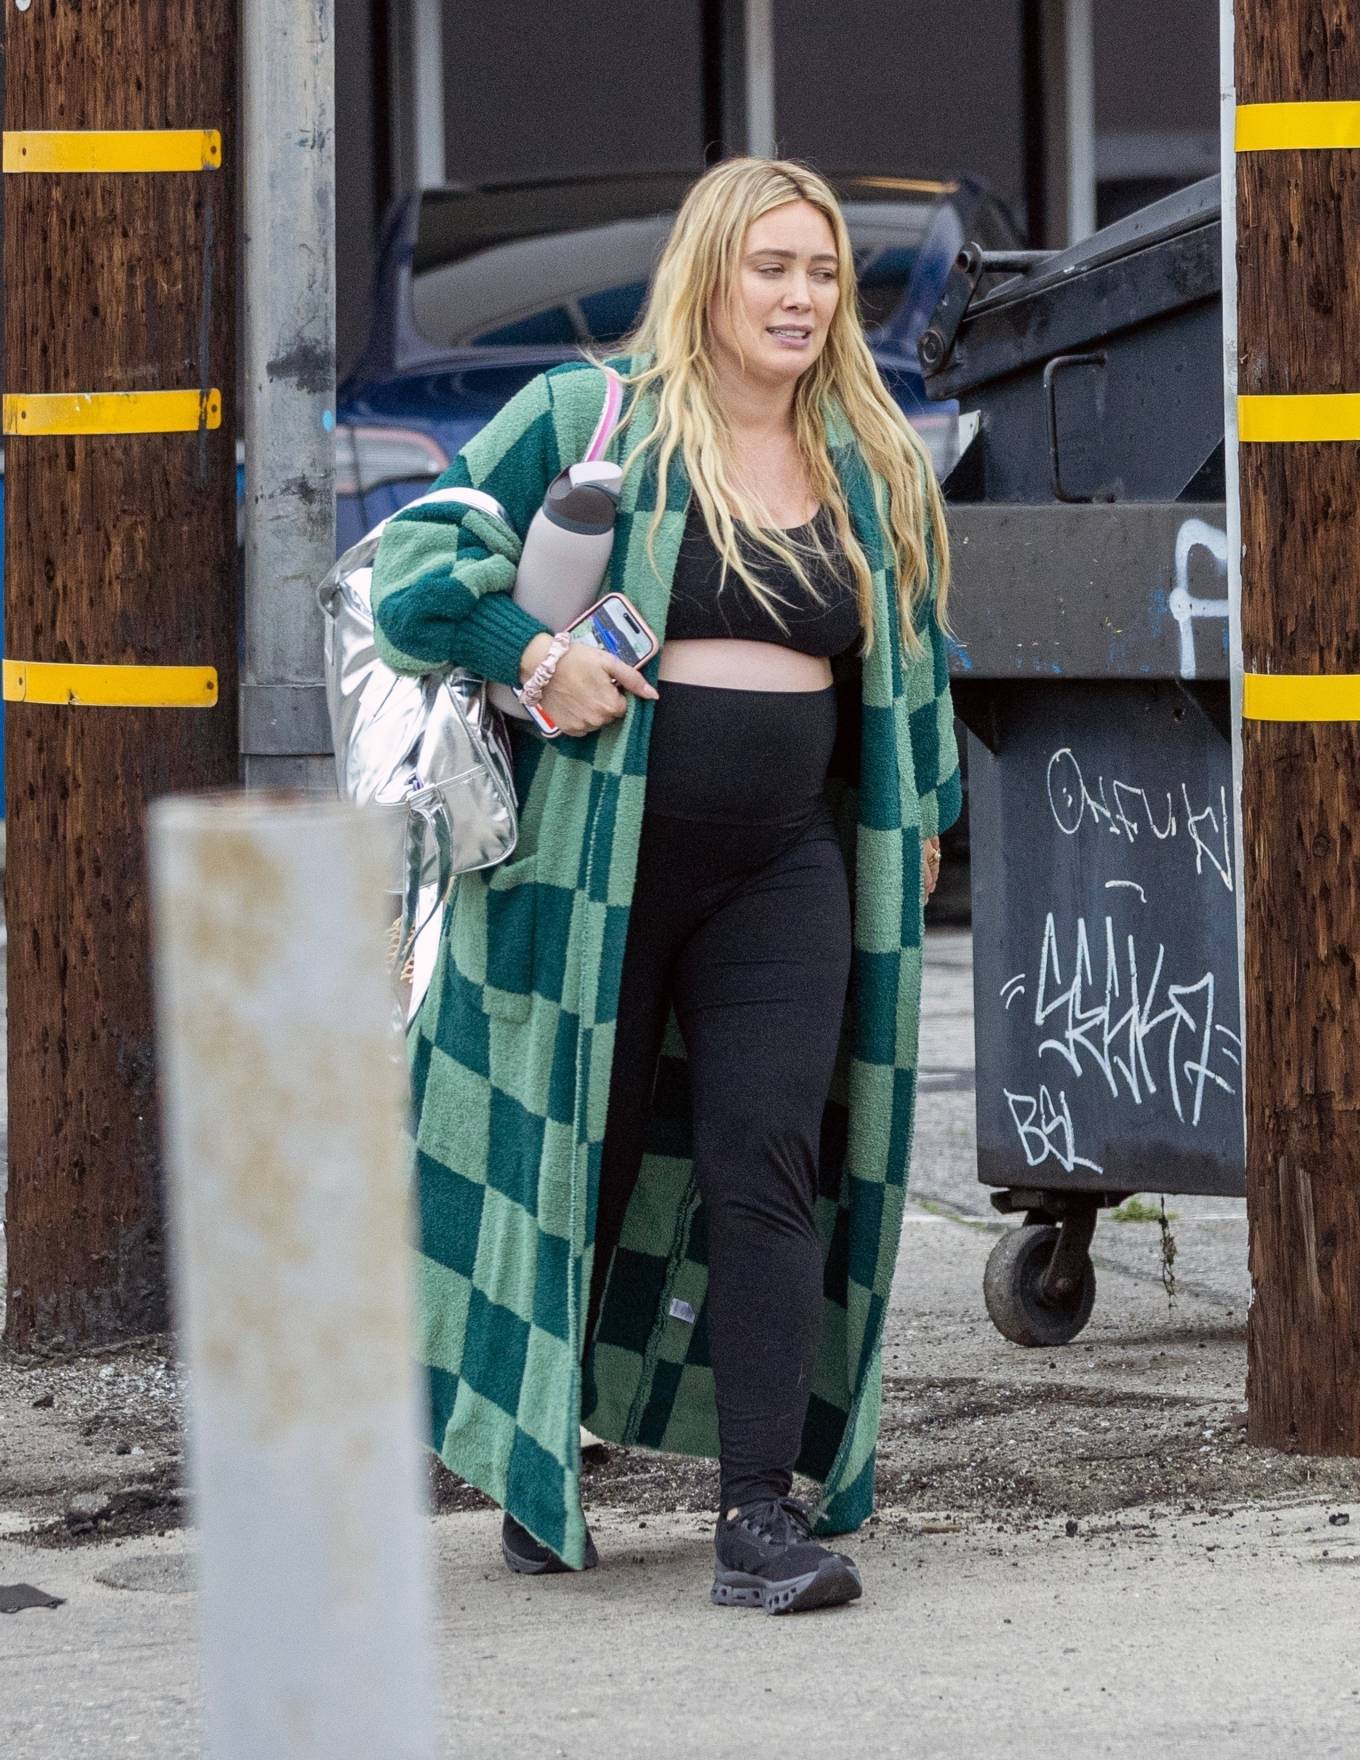 Hilary Duff - Taking her daughter to dance class in Los Angeles